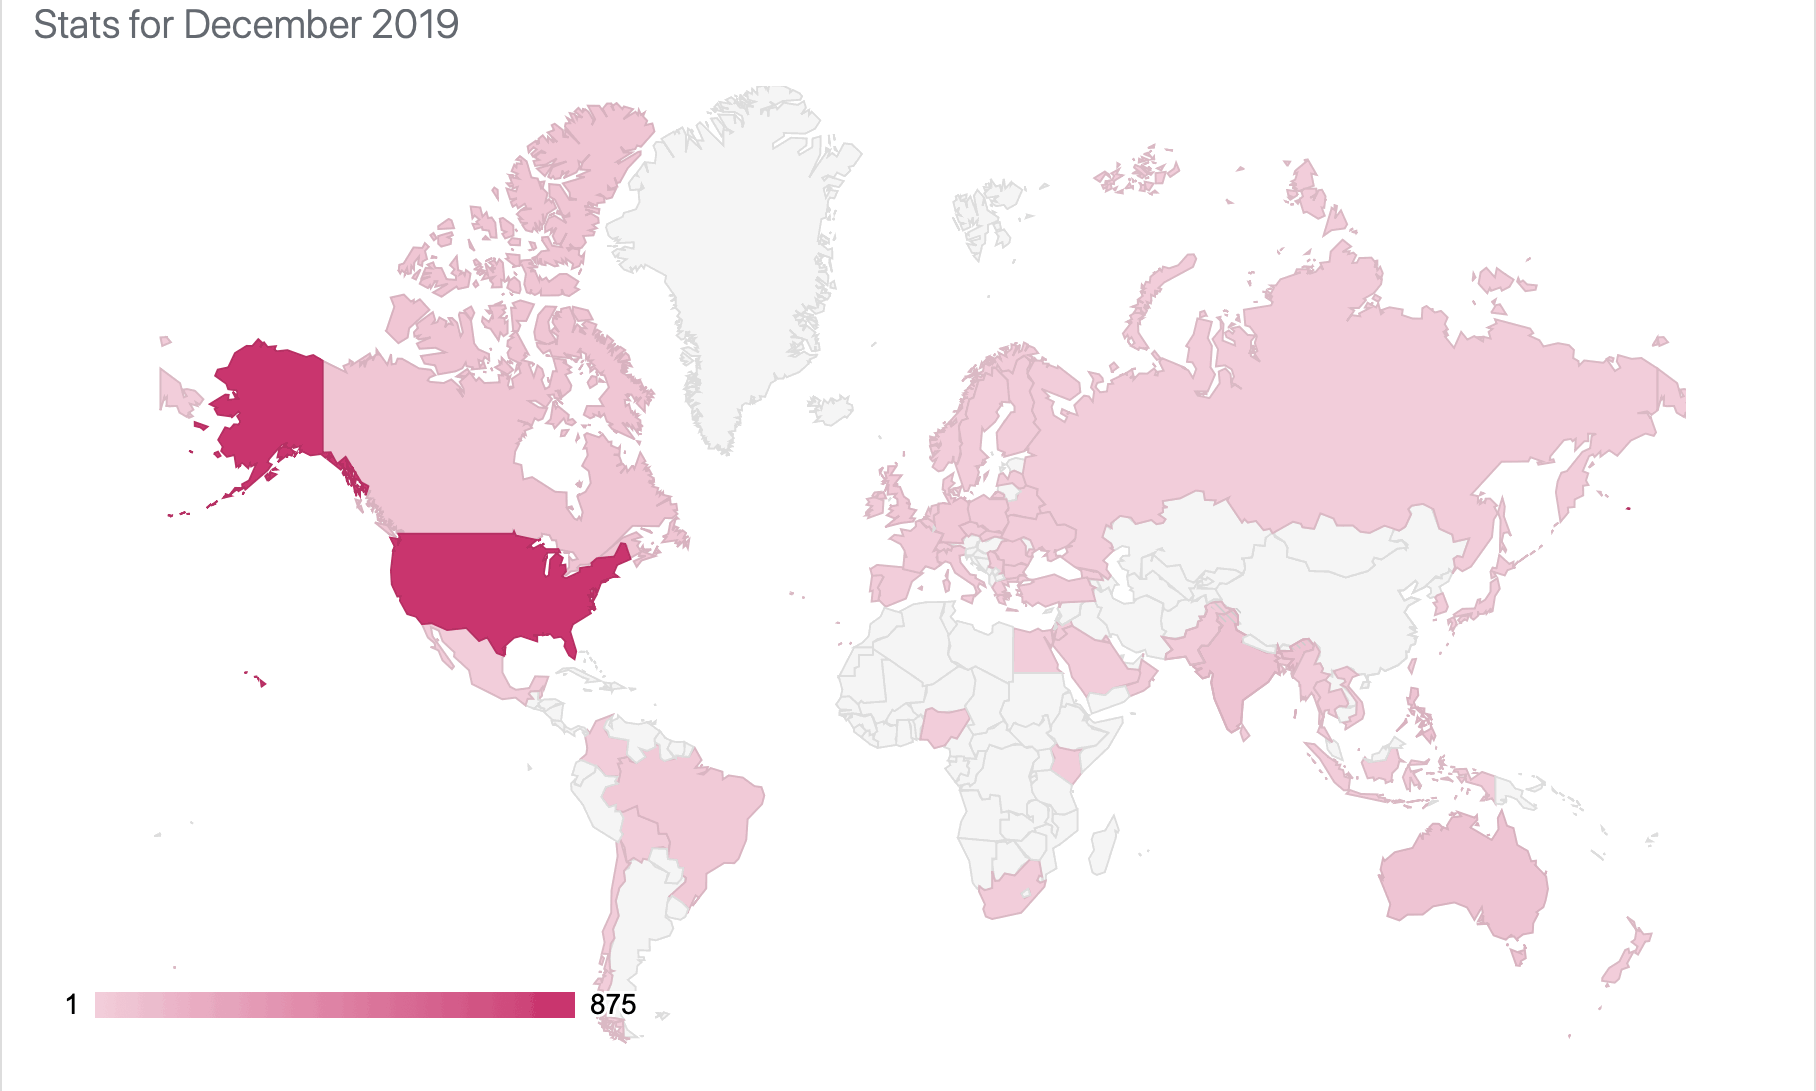 Mercator-style map of the world, with the United States in darkest red. Canada, Mexico, Brazil, most of Europe, South Asia, and Australia and New Zealand are in a fairly uniform pink too. There are a smattering of African and South American countries also offering readers.